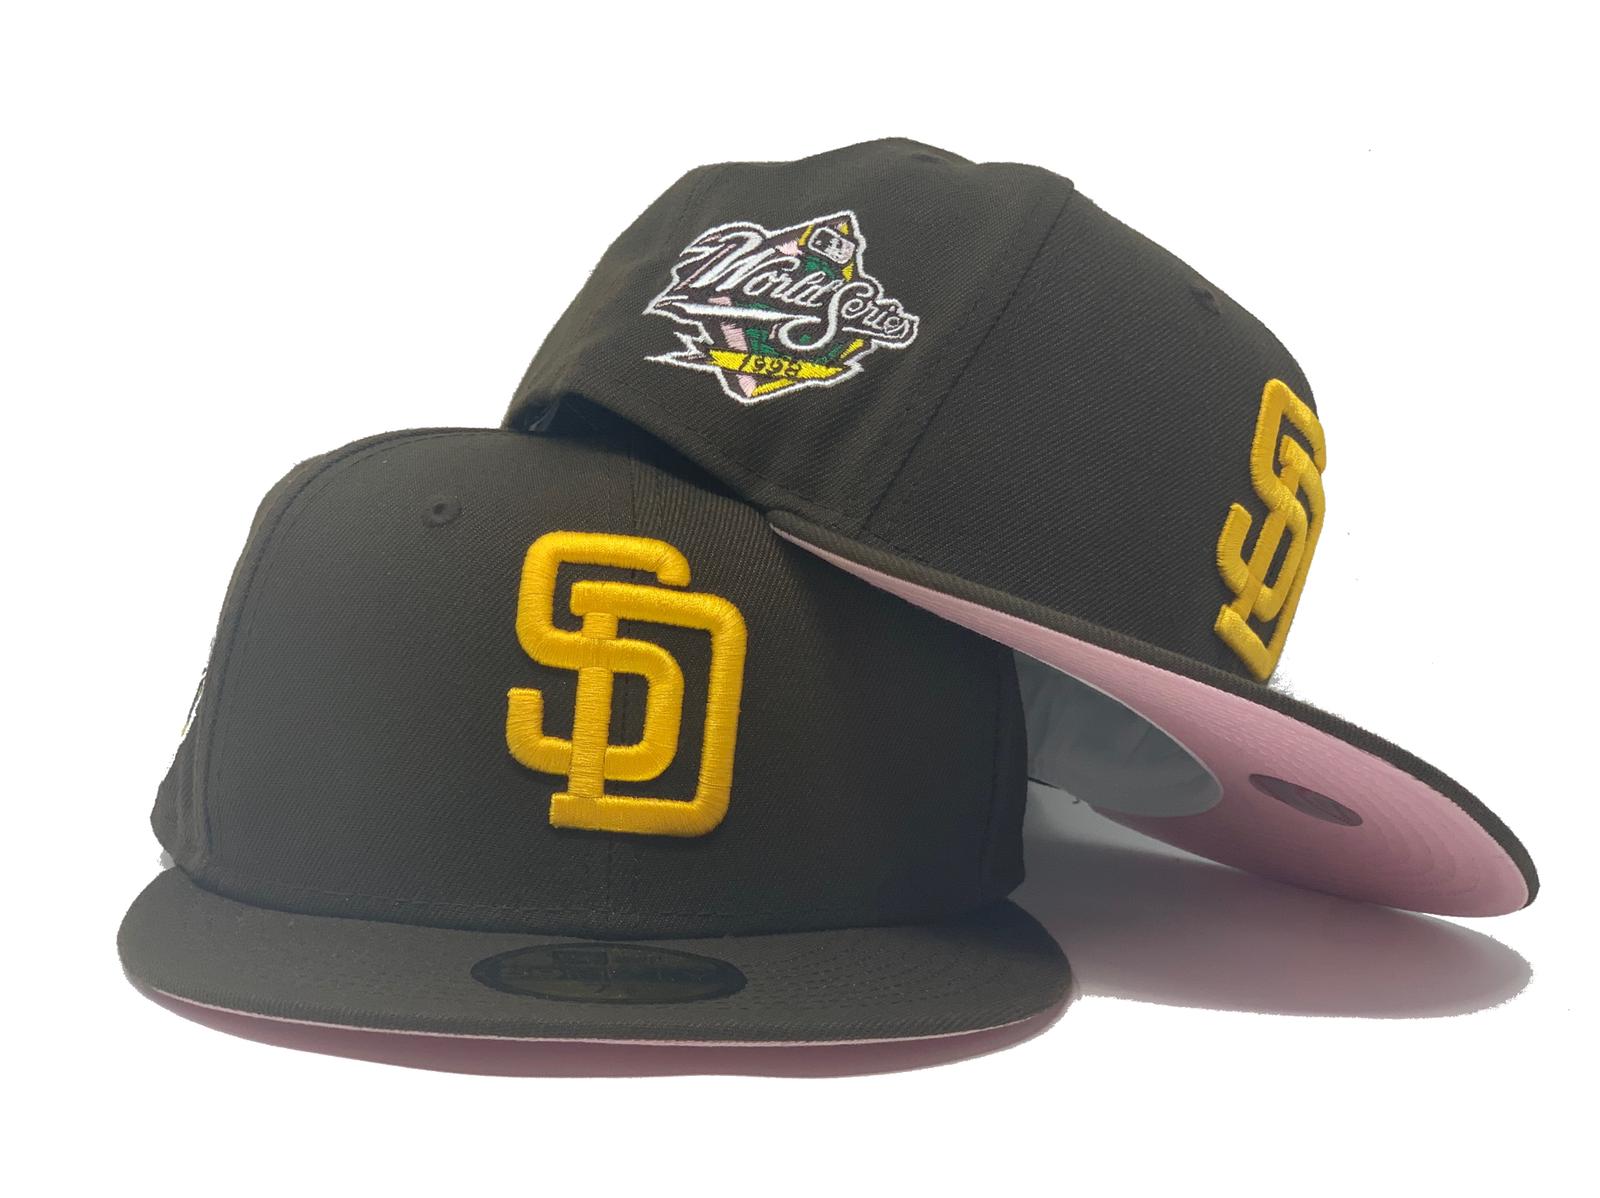 New Era Men's New Era Orange/Purple San Diego Padres 1998 World Series Side  Patch 59FIFTY Fitted Hat